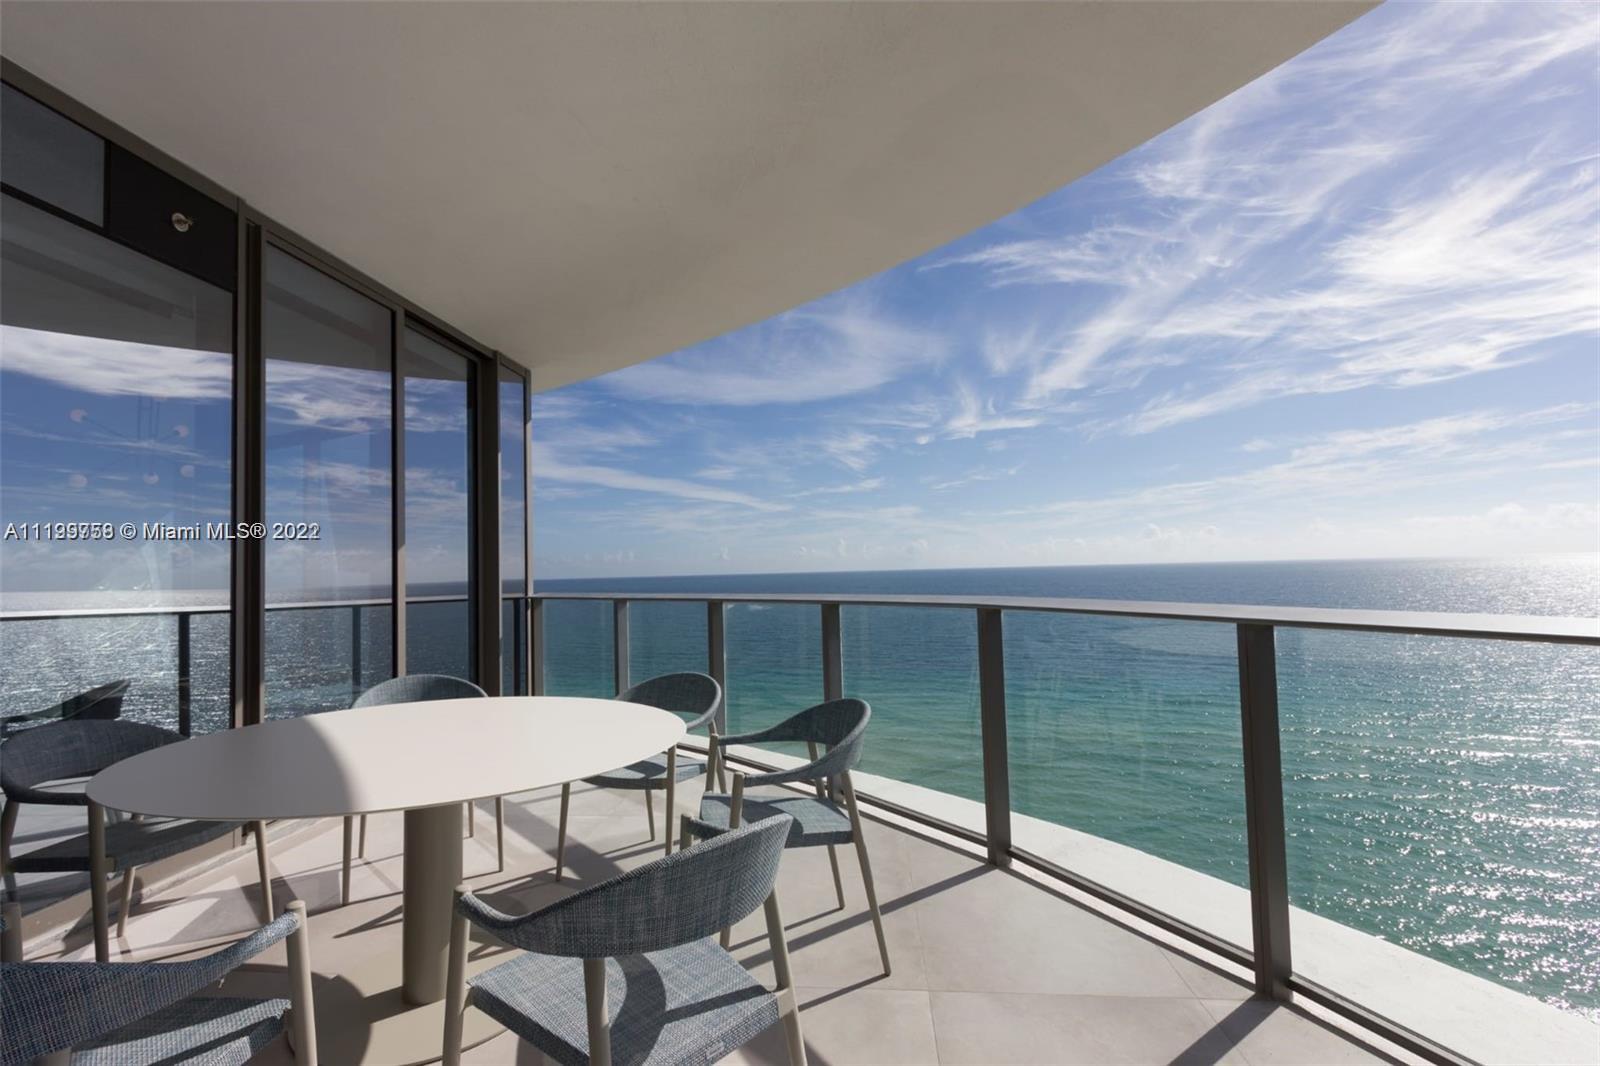 AMAZING OCEANFRONT 4 BEDS + DEN / 5.5 BATHS UNIT AT THE RITZ CARLTON SUNNY ISLES!! LARGEST LAYOUT IN THE BUILDING. BEAUTIFUL PANORAMIC VIEWS OF THE OCEAN, BAY, AND SKYLINE FROM ALL BALCONIES & FLOOR TO CEILING GLASS WINDOWS THROUGHOUT THE UNIT!!! PRIVATE ELEVATOR. SNAIDERO KITCHEN & GAGGENAU APPLIANCES. PROFESSIONALLY DESIGNED AND FURNISHED, NO EXPENSE SPARED. LUXURIOUS AMENITIES INCLUDE PRIVATE BEACH ACCESS, POOLS, SPA, RESTAURANT, FITNESS CENTER, AND MANY MORE!!! GREAT LOCATION ON BEAUTIFUL SUNNY ISLES BEACH, CLOSE TO BAL HARBOUR AND AVENTURA.